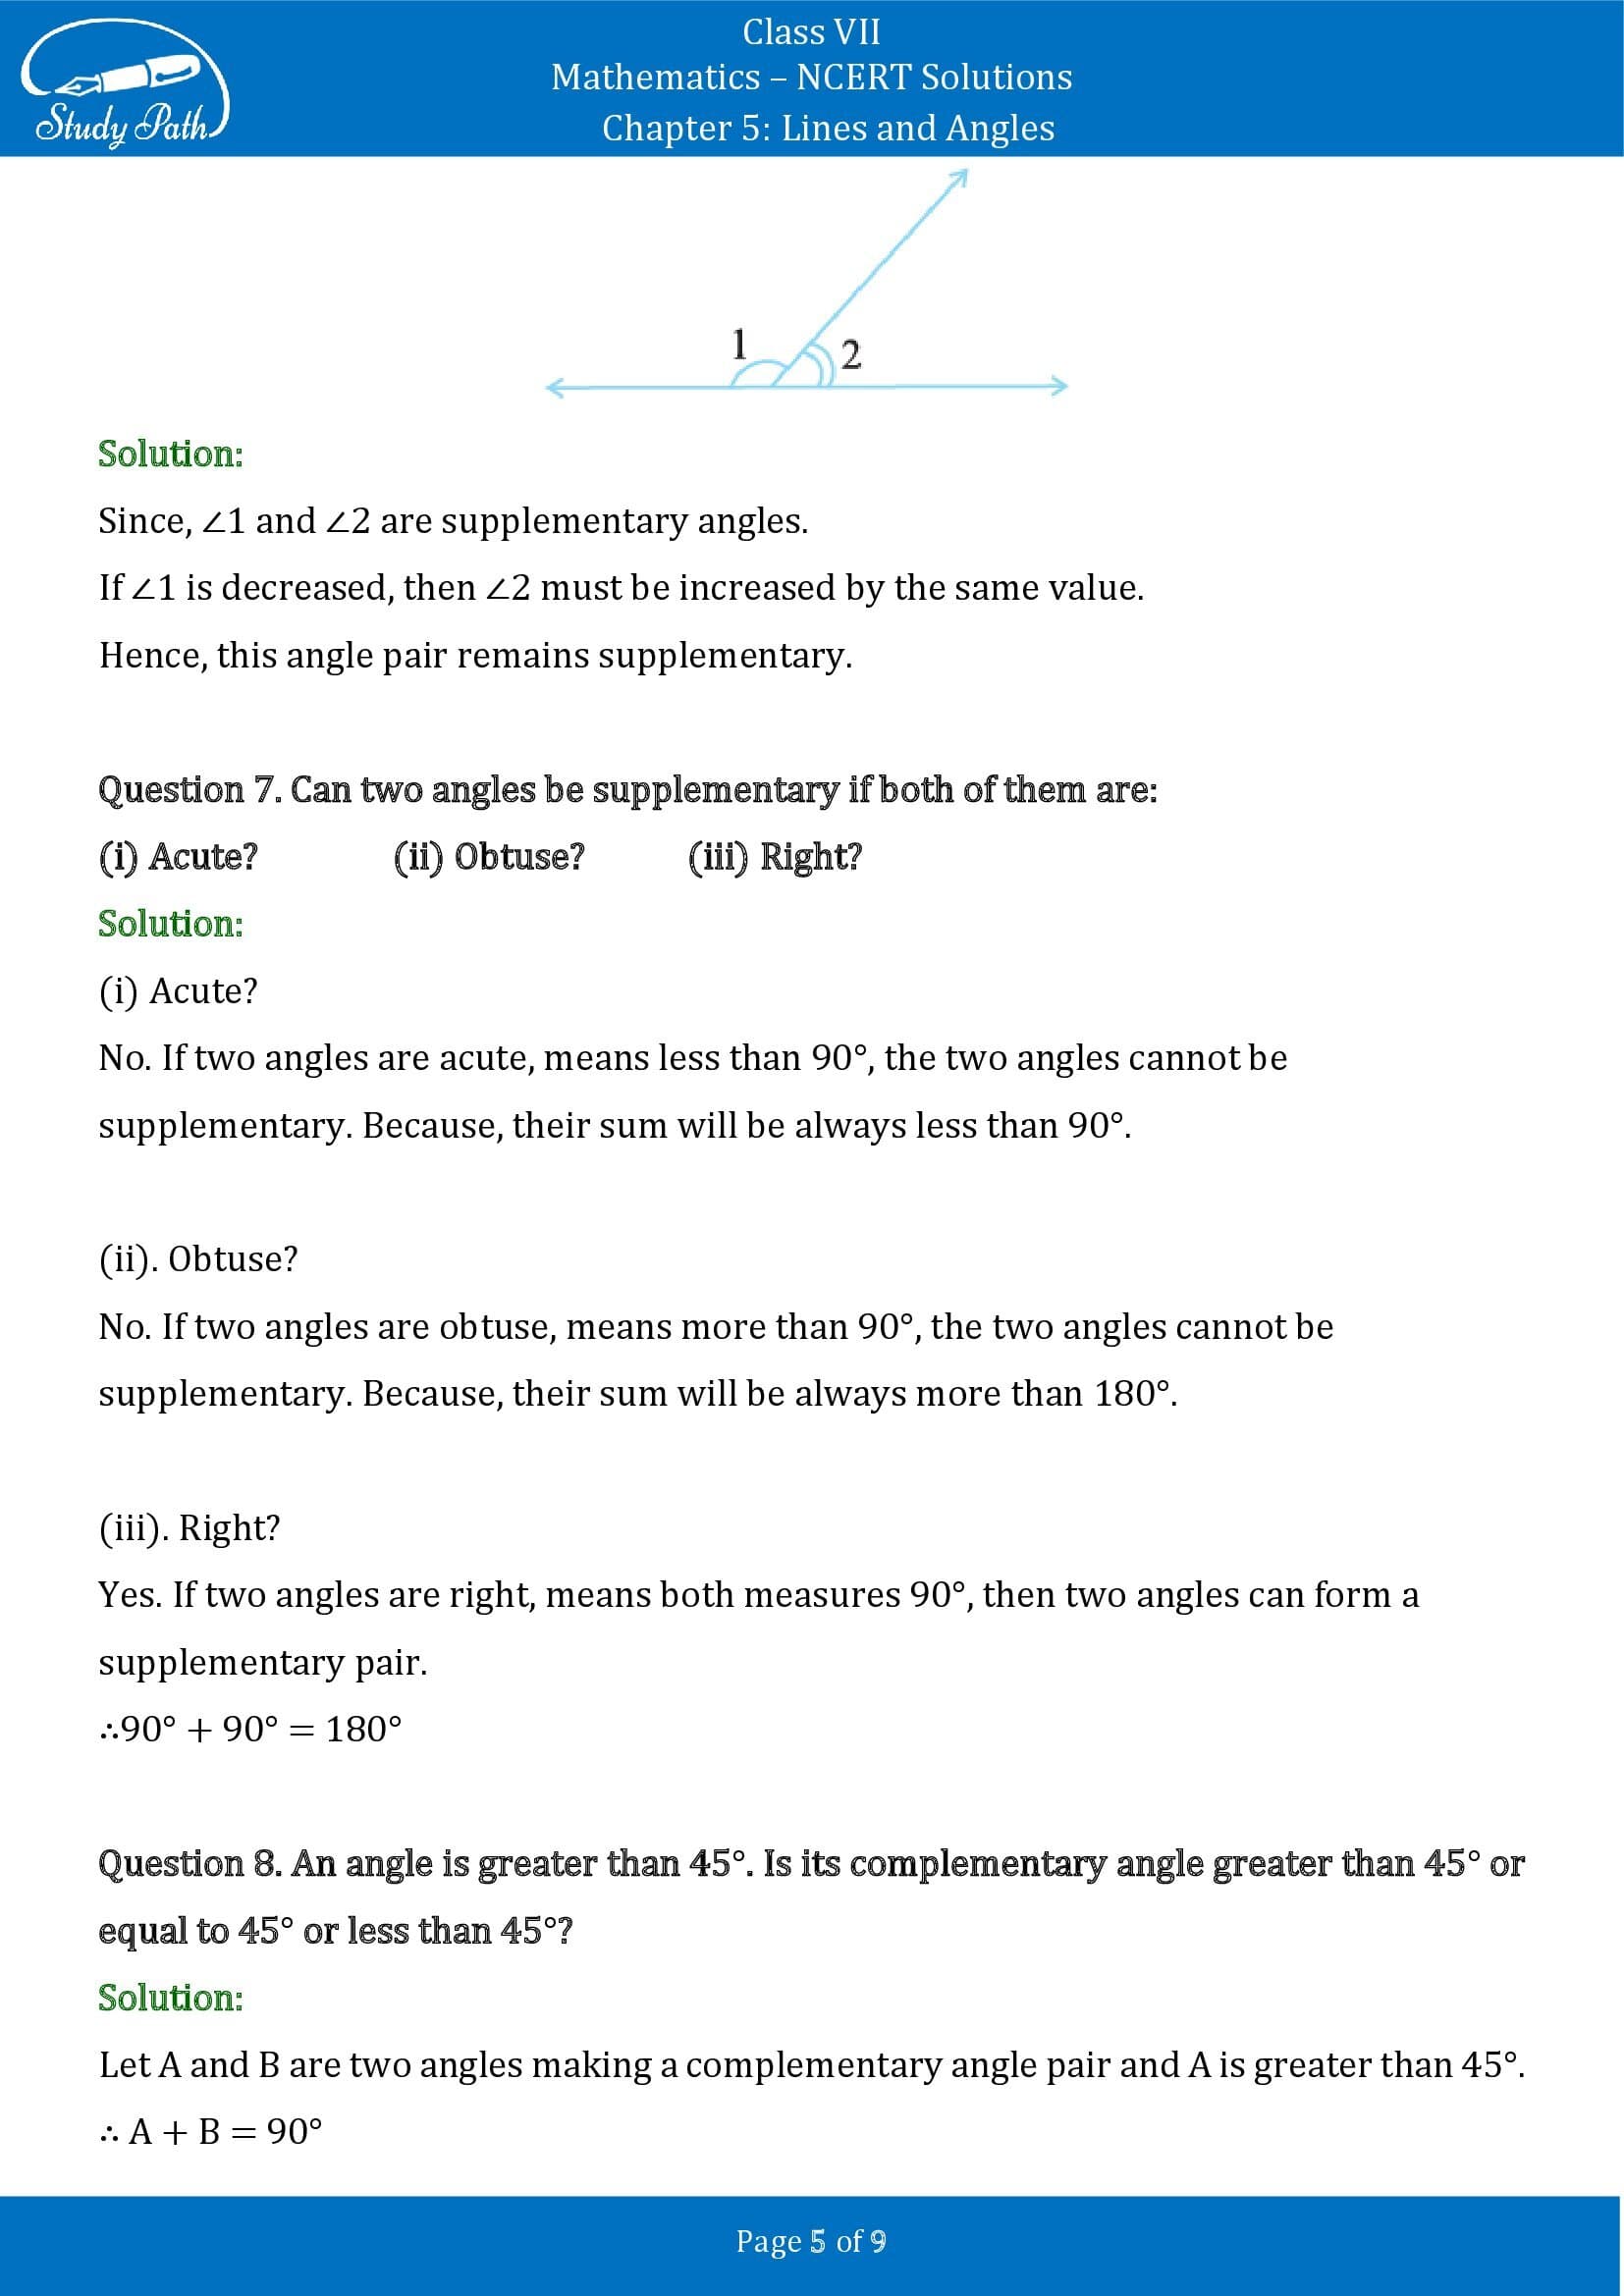 NCERT Solutions for Class 7 Maths Chapter 5 Lines and Angles Exercise 5.1 00005